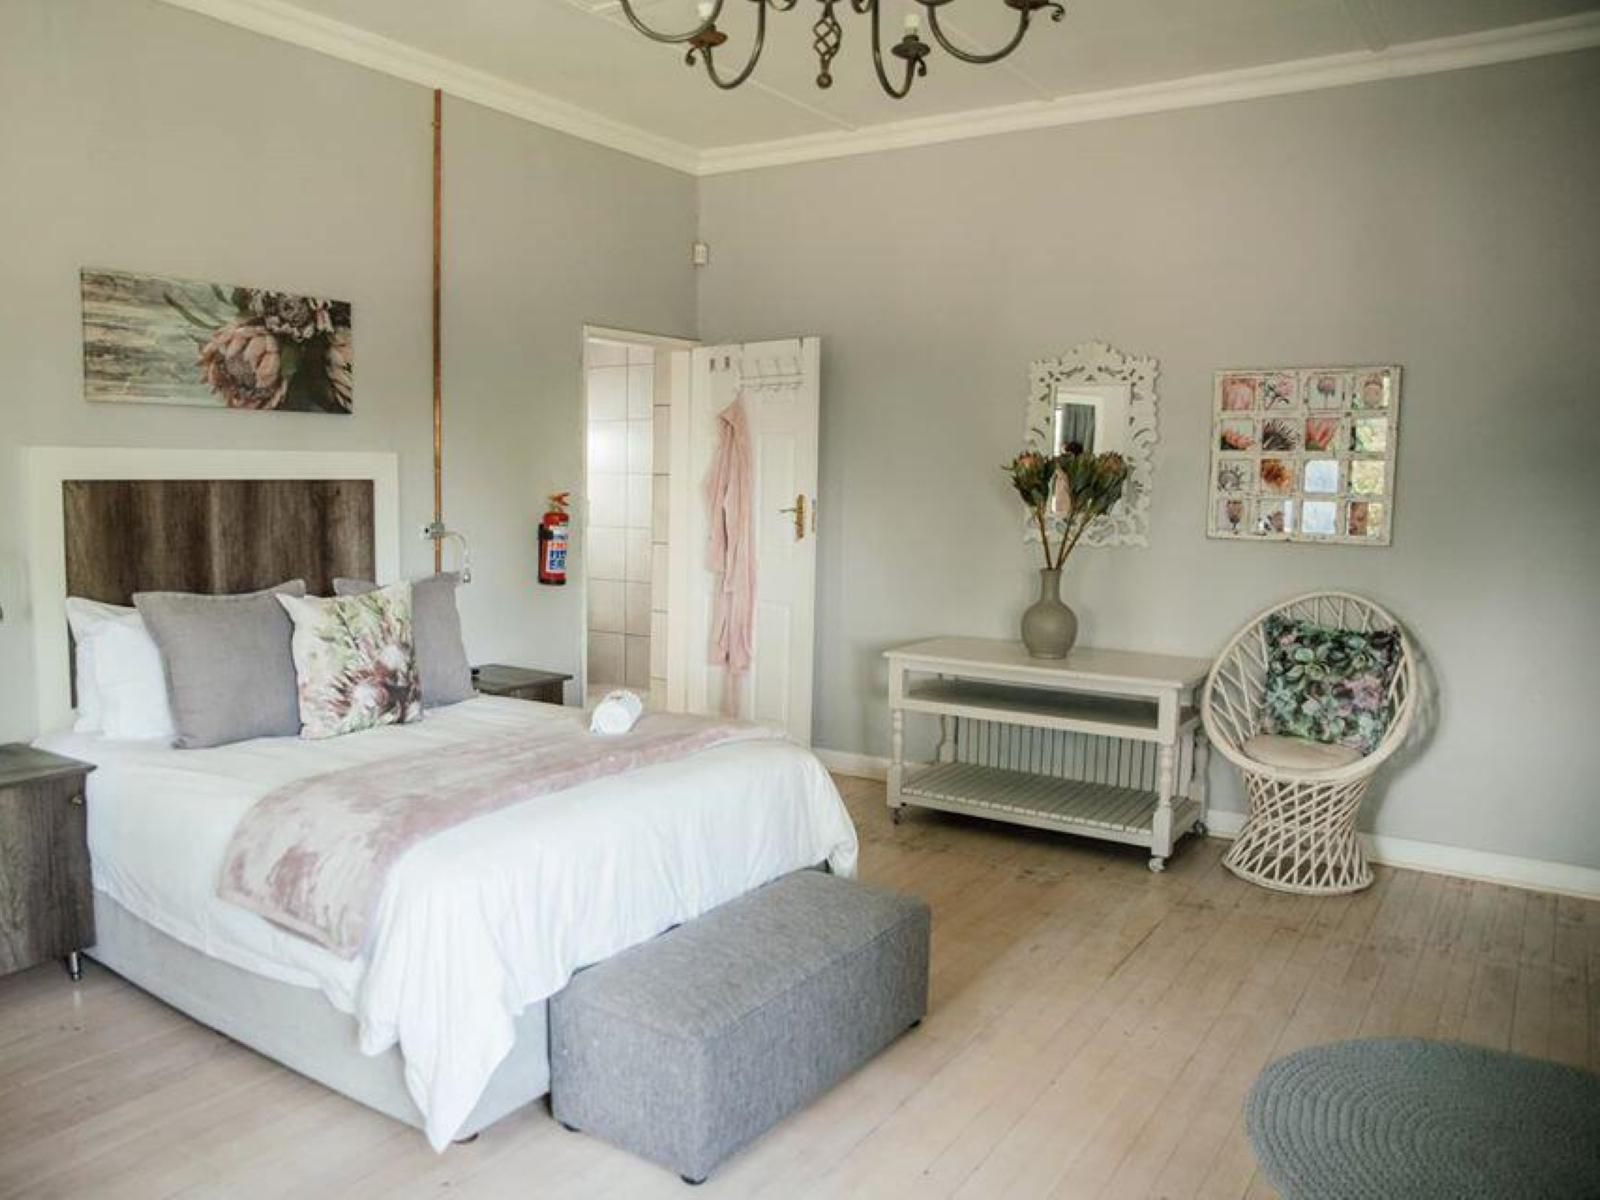 The Perfect Corner Guesthouse Bethlehem Free State South Africa Unsaturated, Bedroom